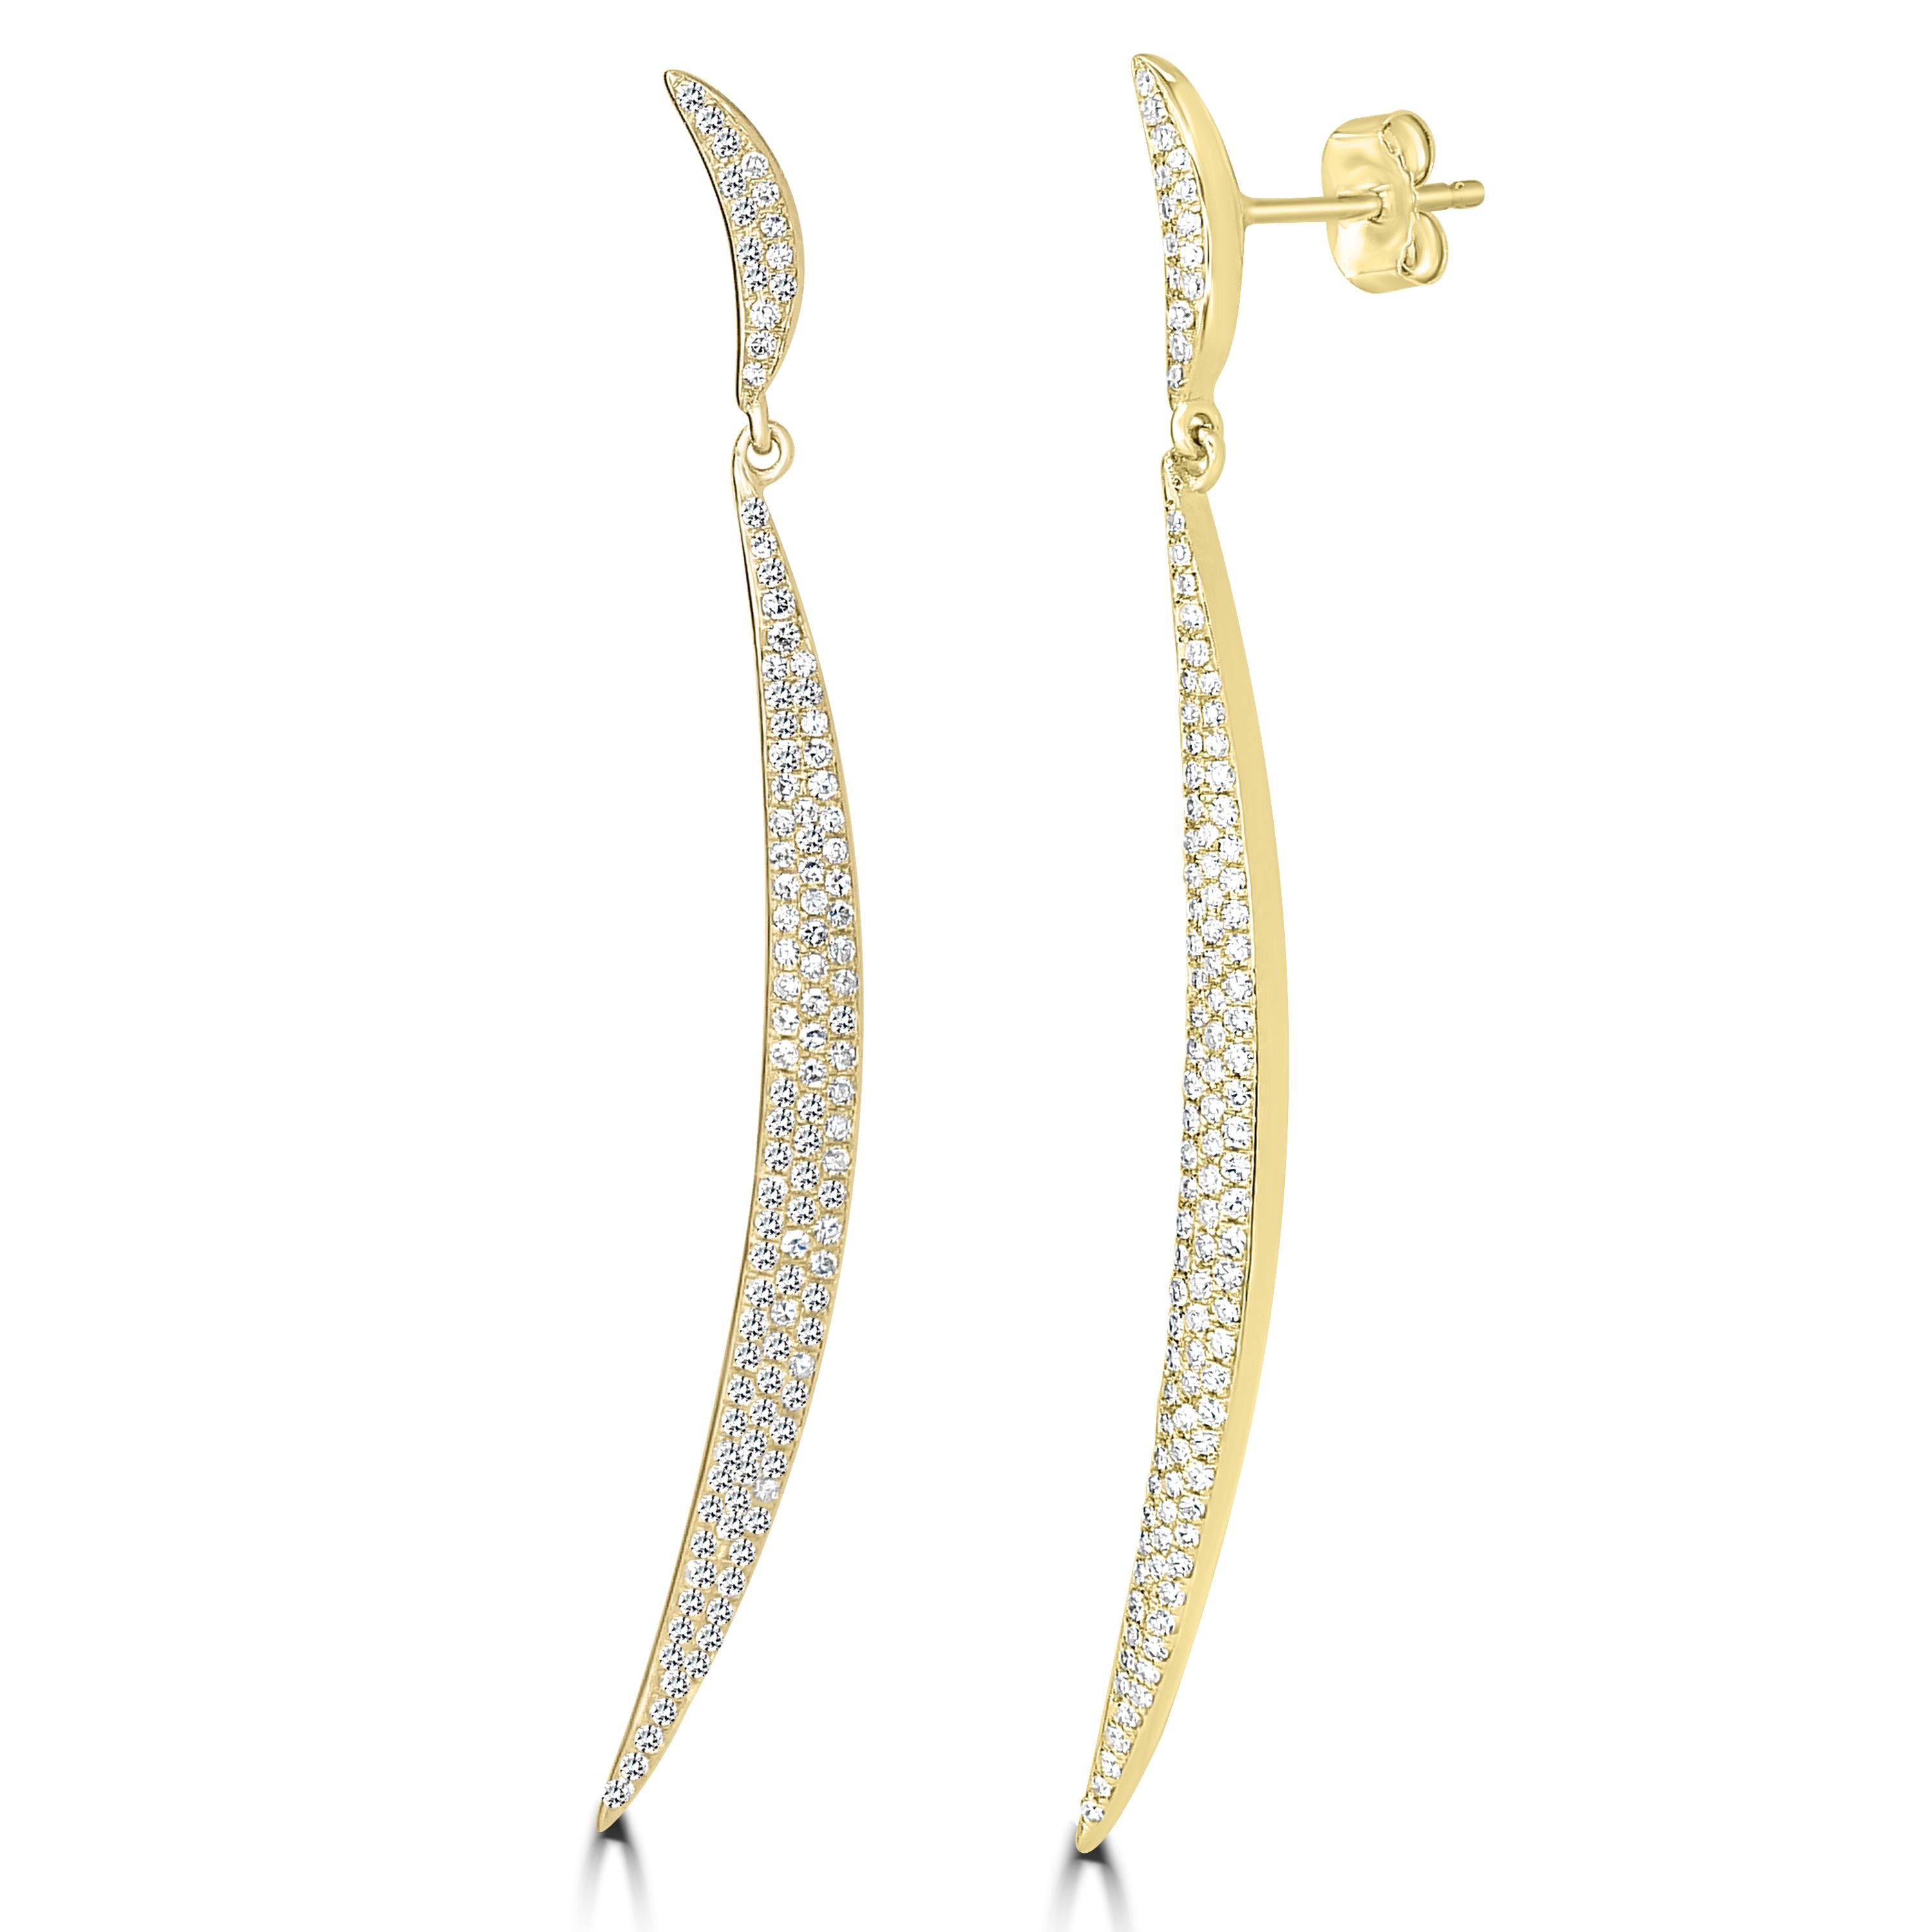 These Luxle diamond pave drop earrings have an elegant beauty and subtle flair that make them the ideal accessory.  These curved earrings are set with 0.70 carats of round single-cut diamonds. They are ideal for you to wear on important occasions